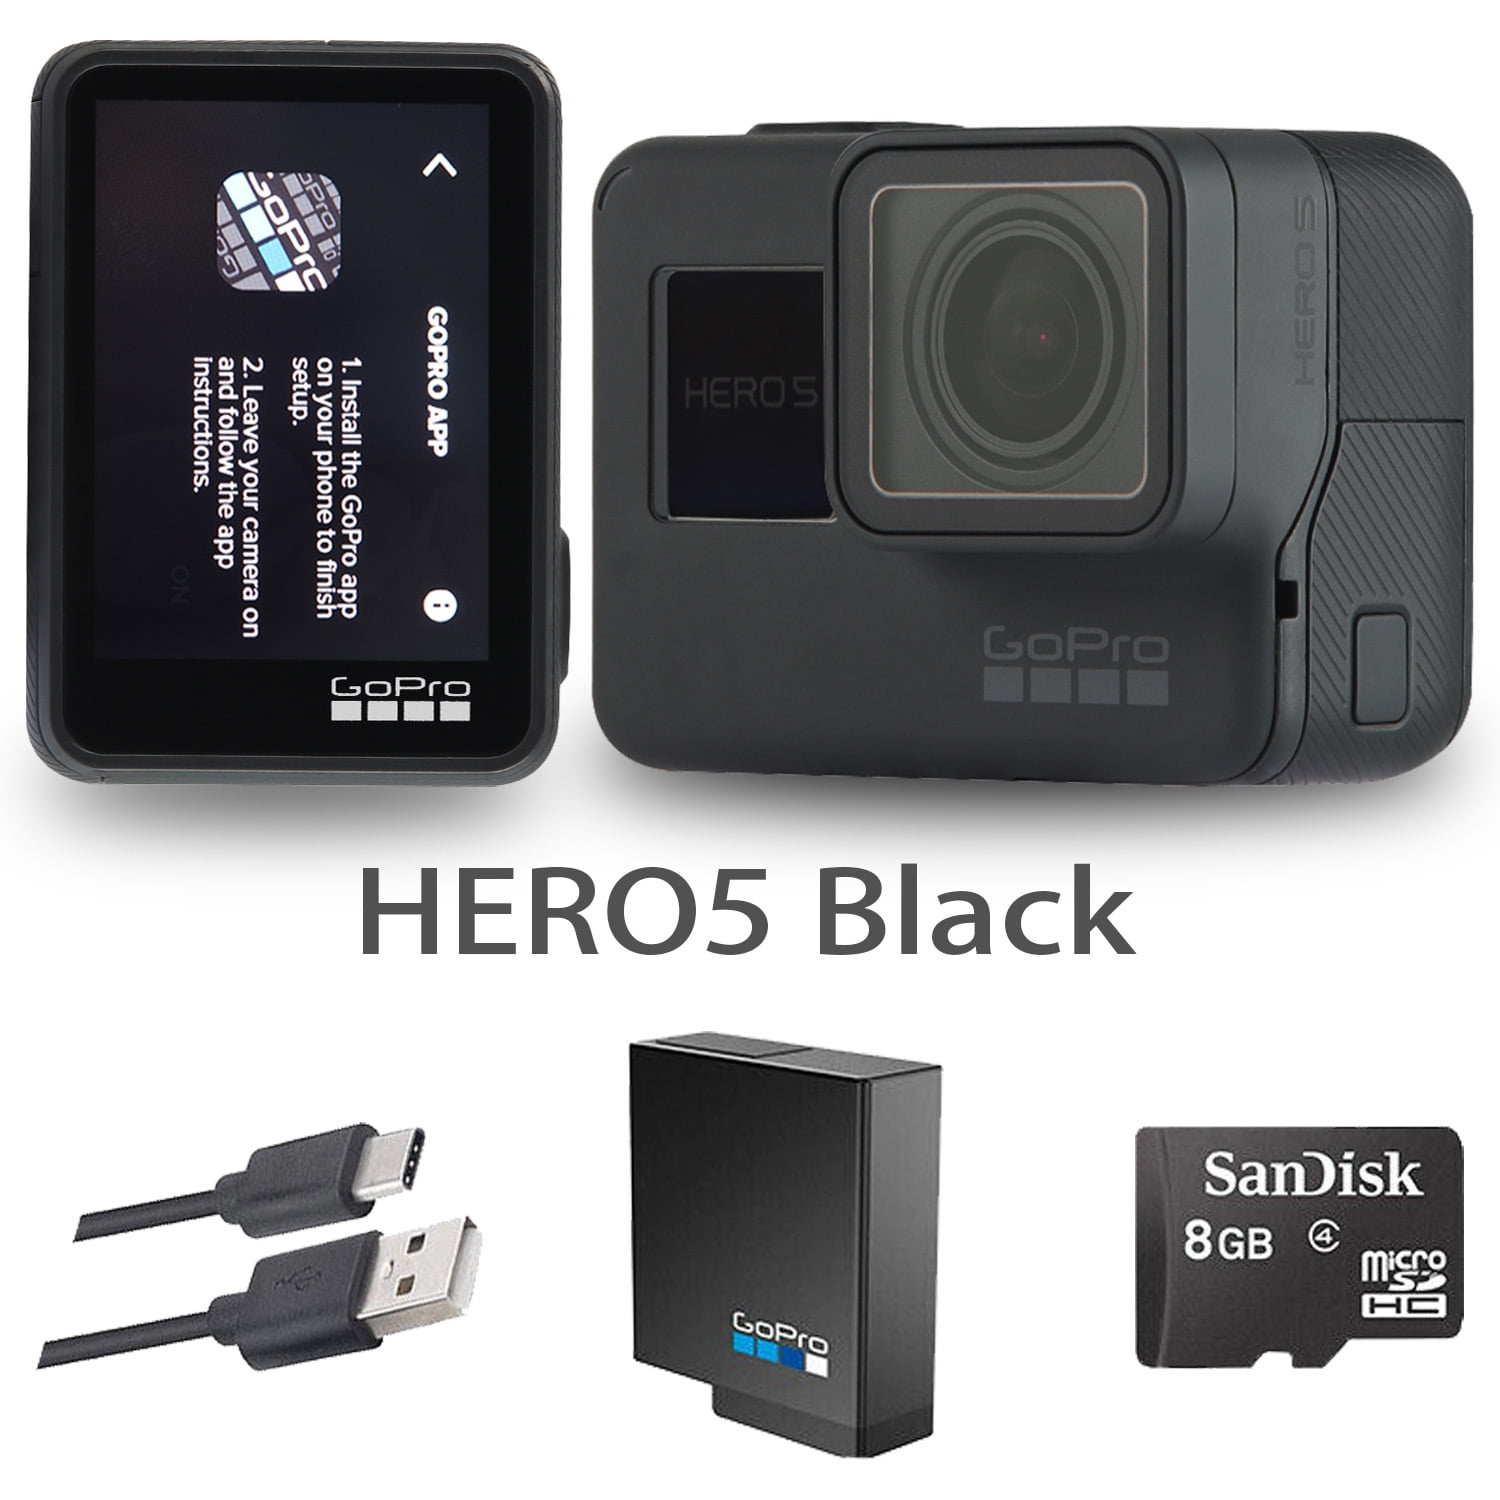 Snake Typical hard working Restored GoPro HERO 5 Black Edition Waterproof Sport Action Camera with  Touch Screen 4K Ultra HD Video 12MP Photos - Refurbished - Walmart.com